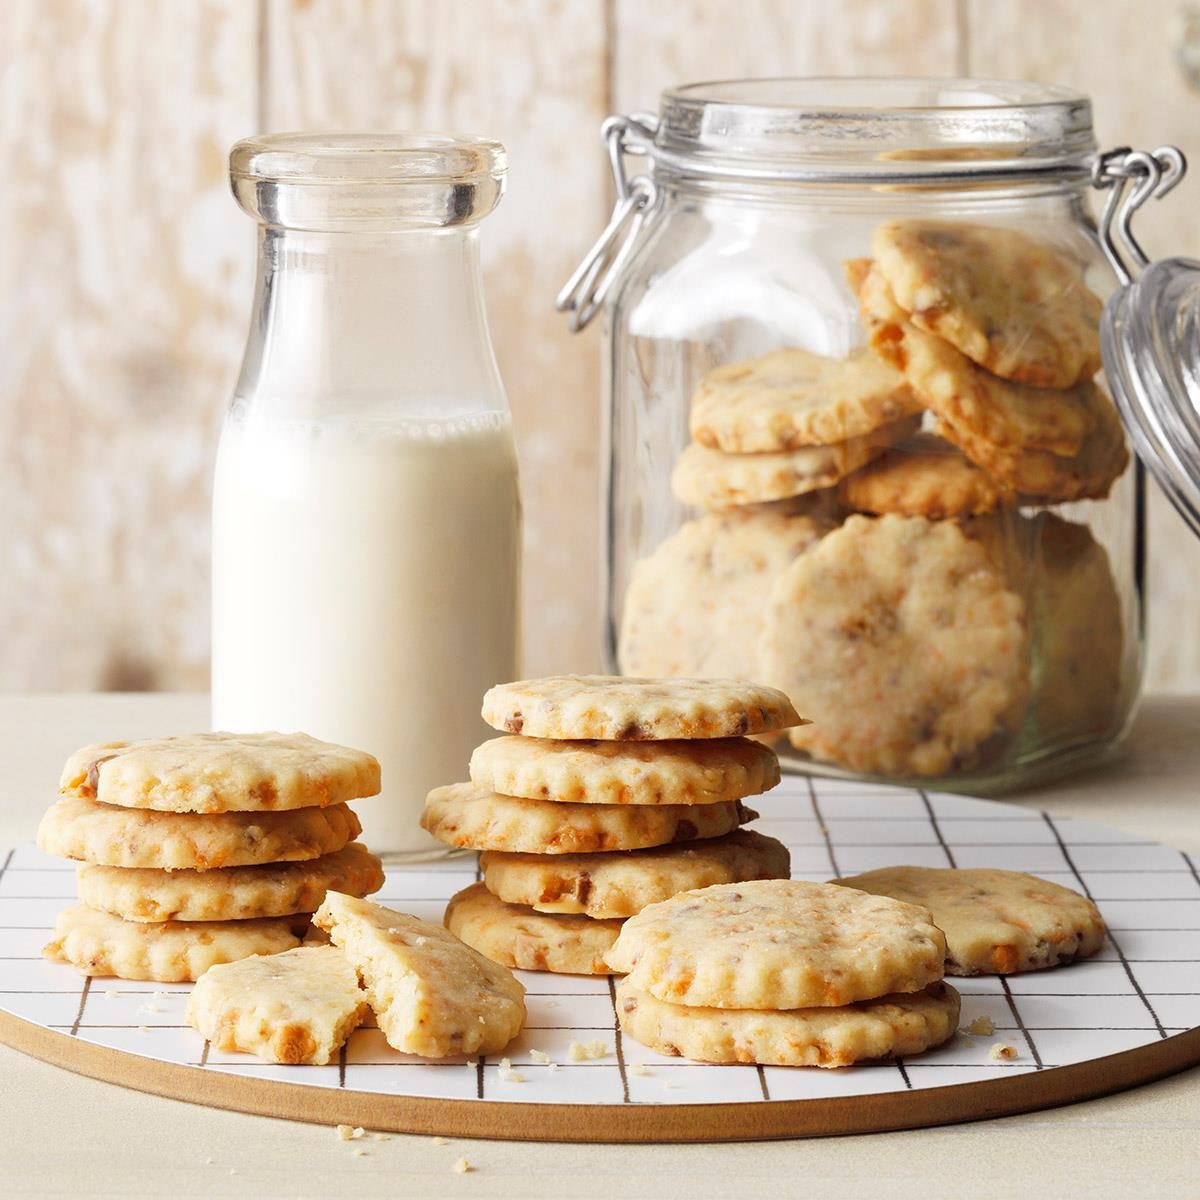 It's Stock-Up Time: Here's What You Need for Cookie Baking Season